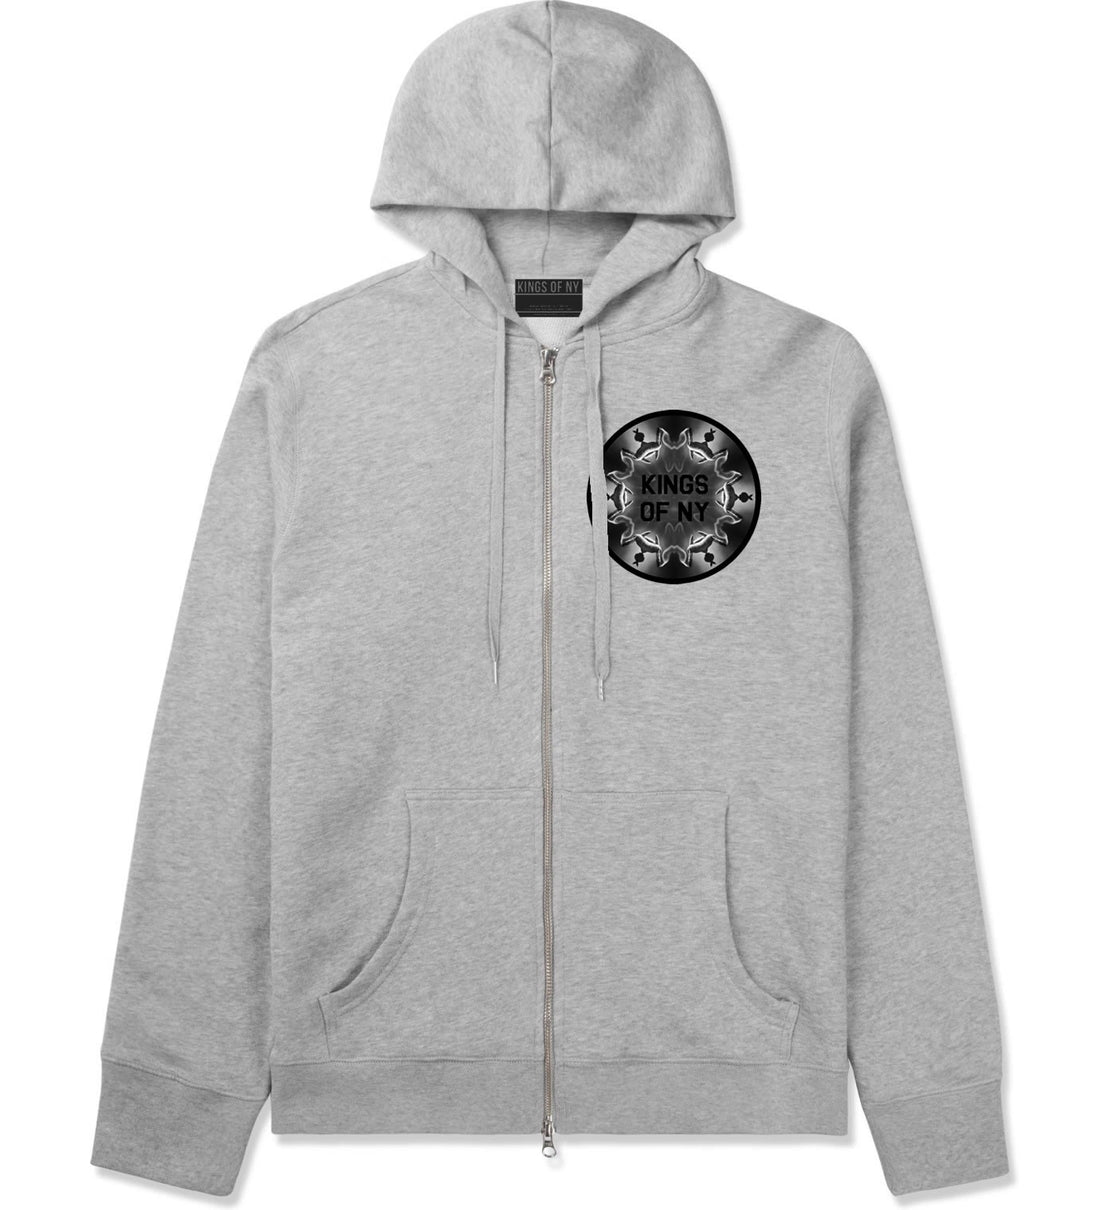 Pass That Blunt Zip Up Hoodie in Grey By Kings Of NY